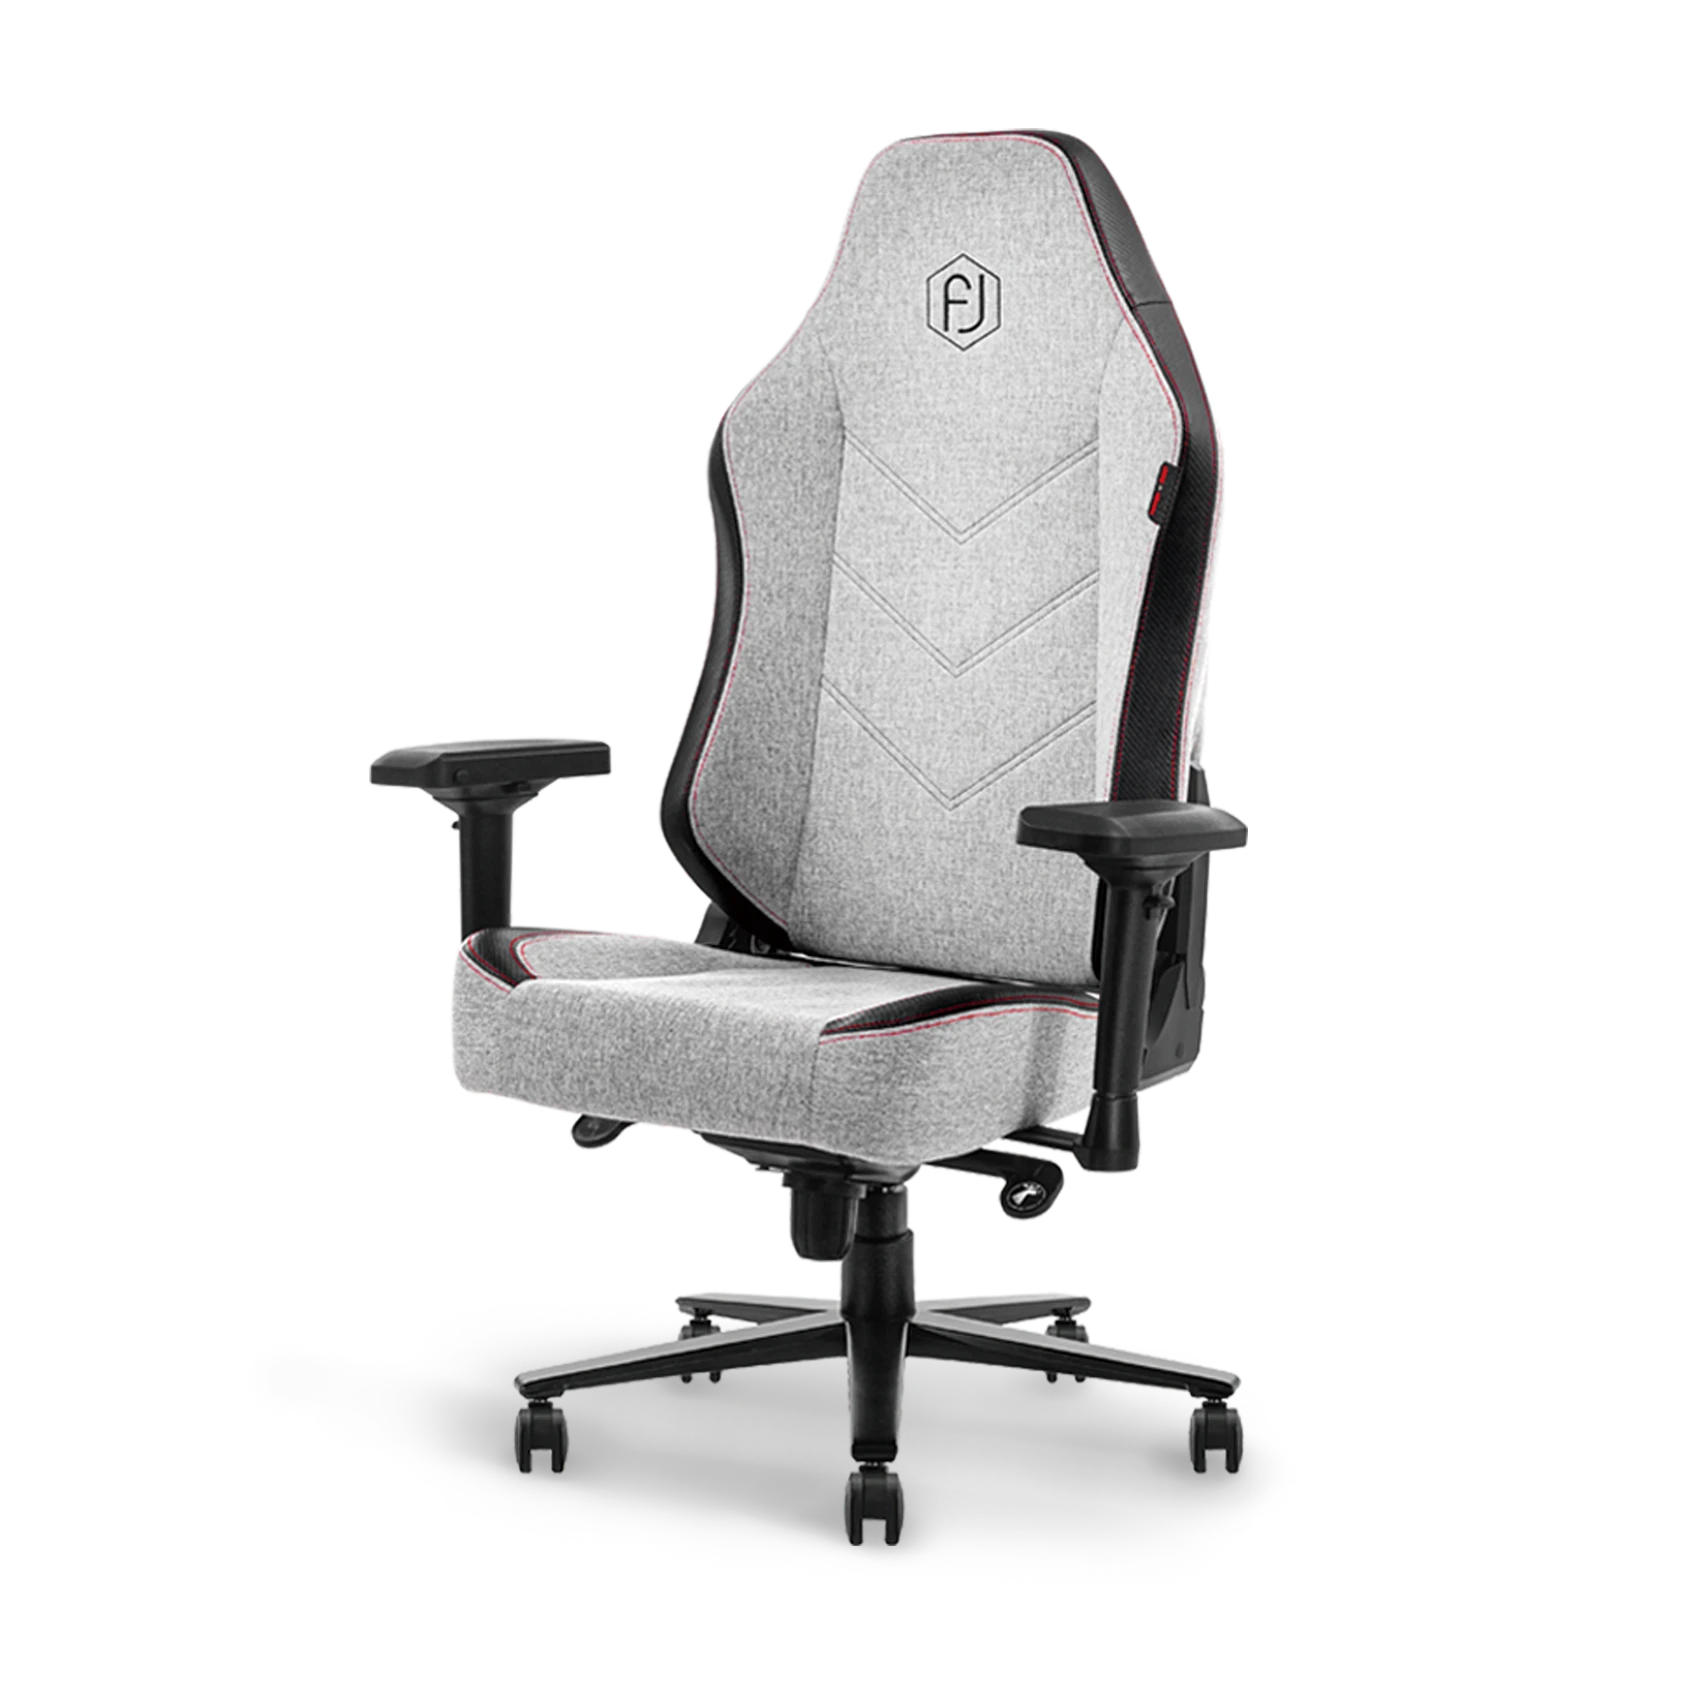 Greige Grey ergonomic gaming chair with embroidered logo and adjustable armrests, front view.